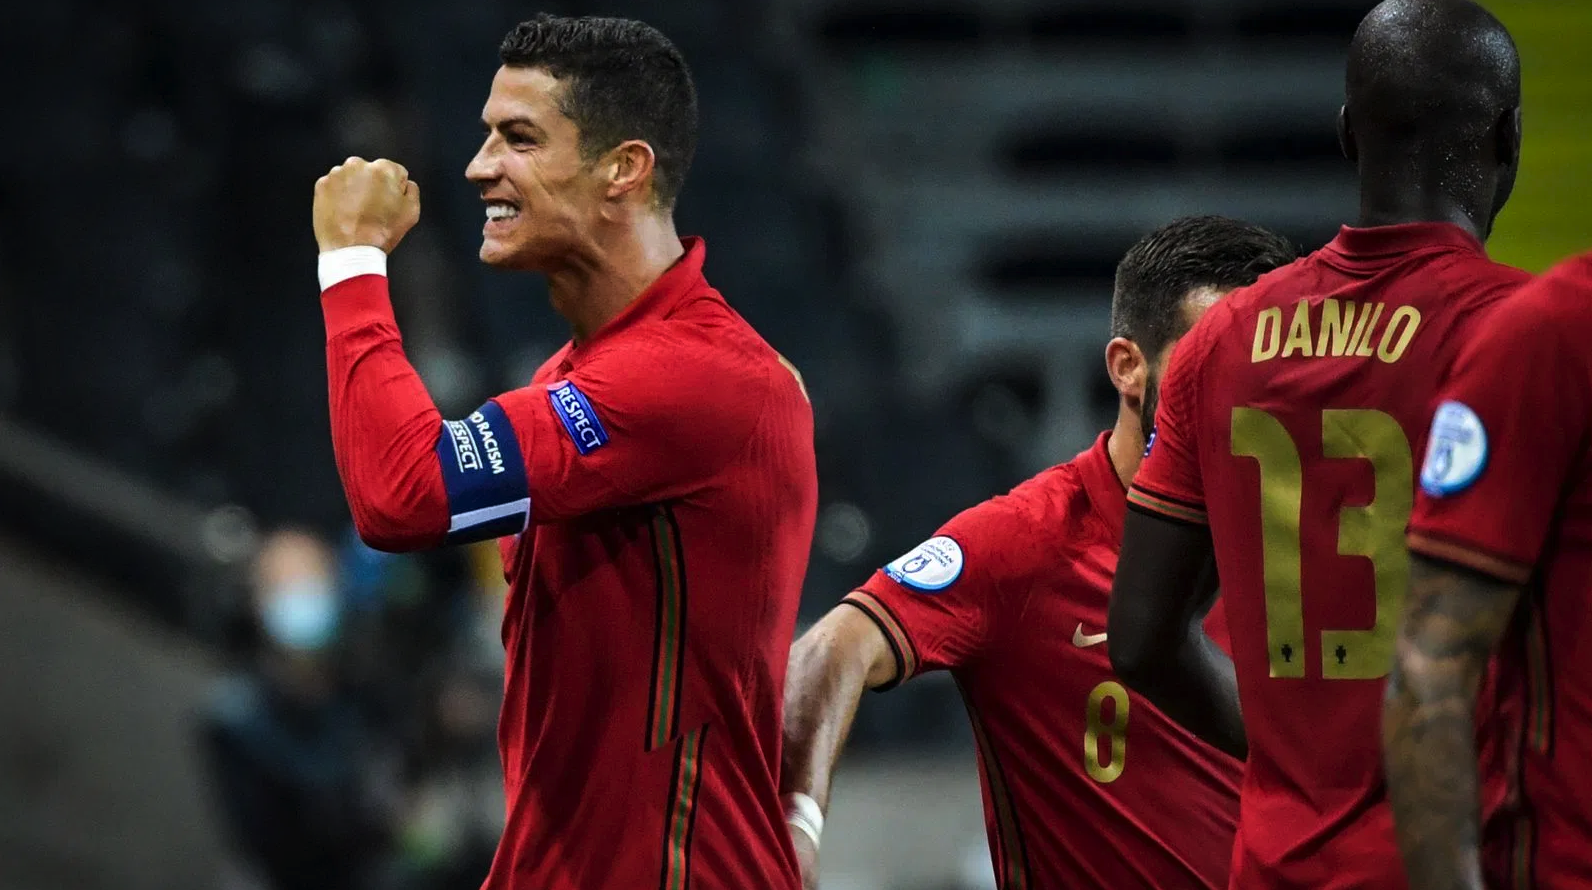 In Round 2 of the Nations League, it was the Cristiano Ronaldo show in Stockholm as the Juventus ace scored a brace to get to 101 goals for Portugal